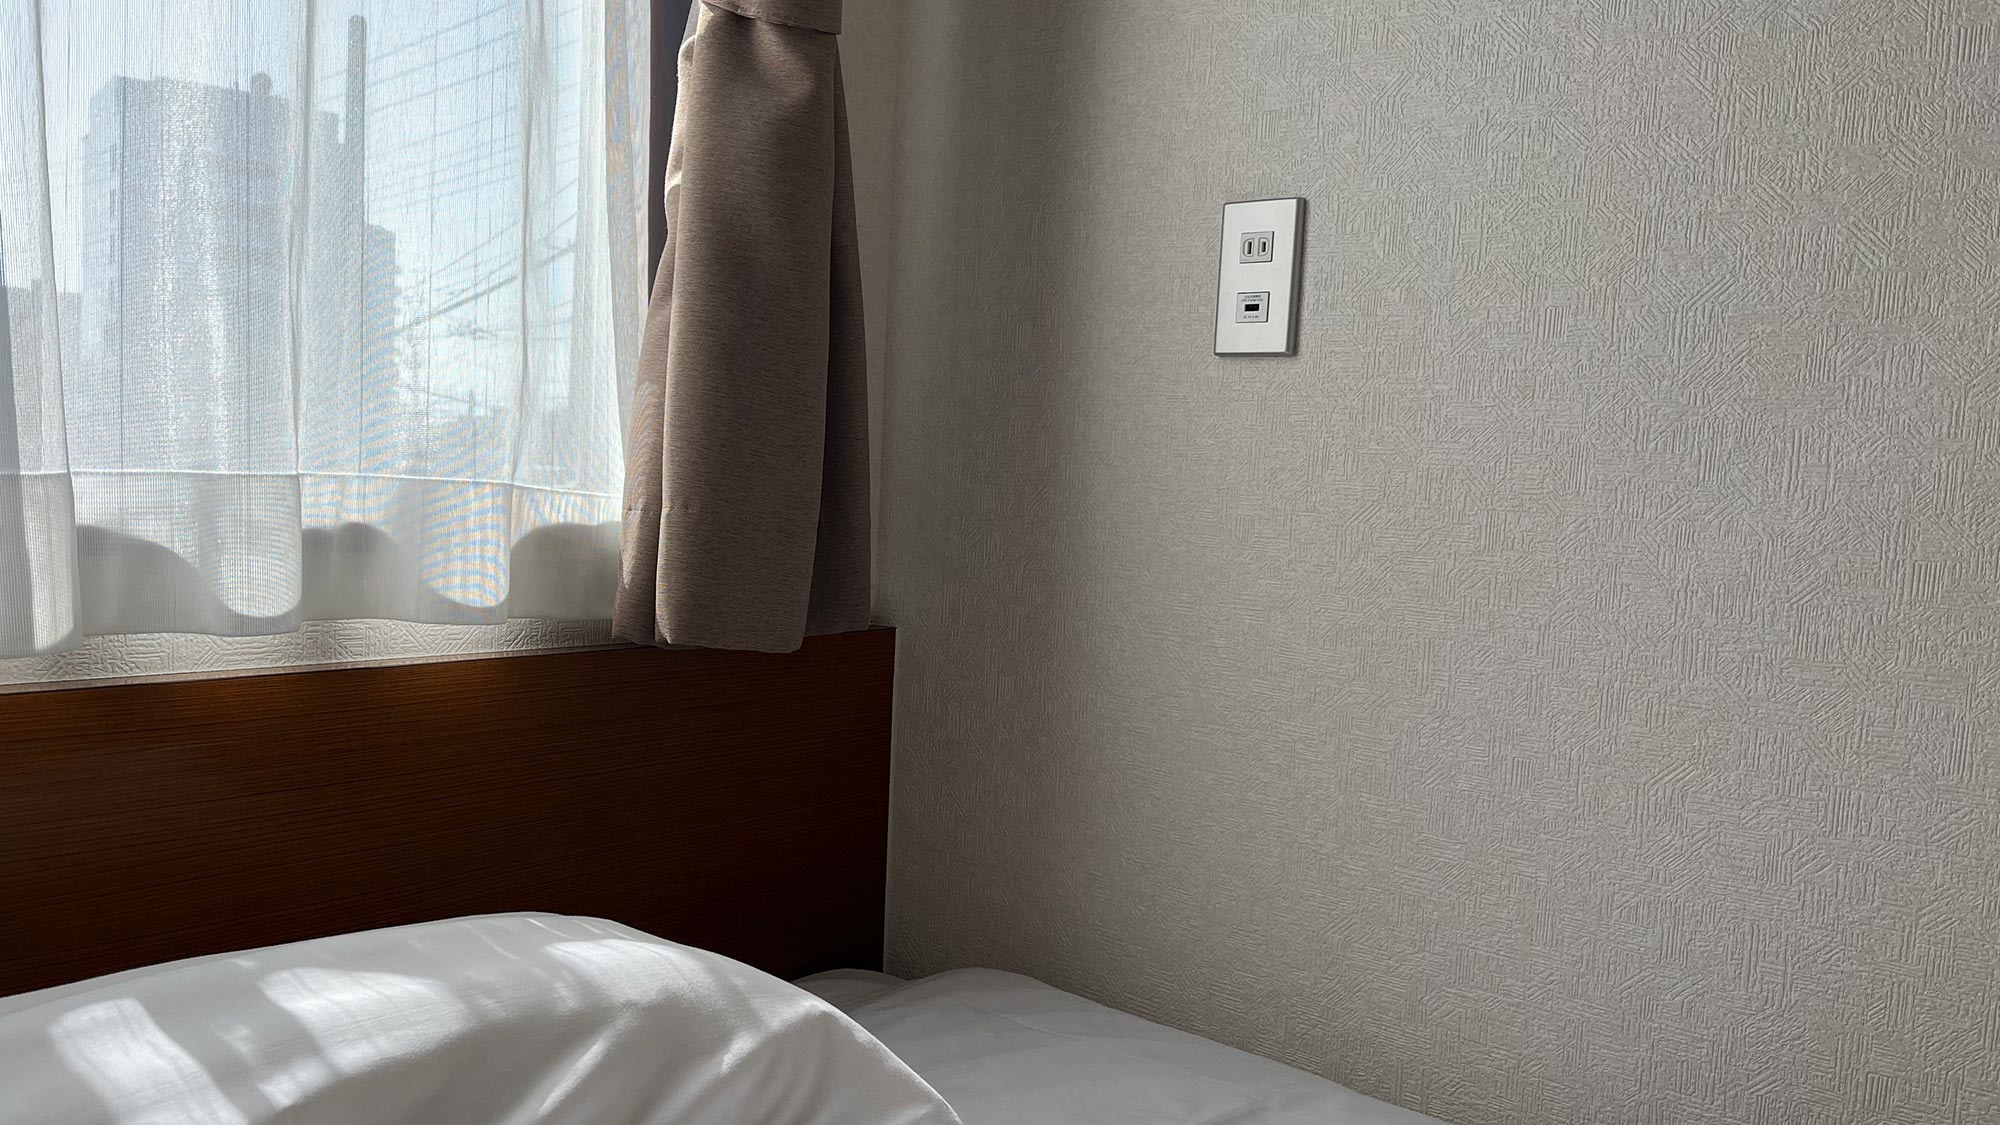 ・An outlet plug and a USB-A outlet are provided at the bedside (locations vary depending on the room)